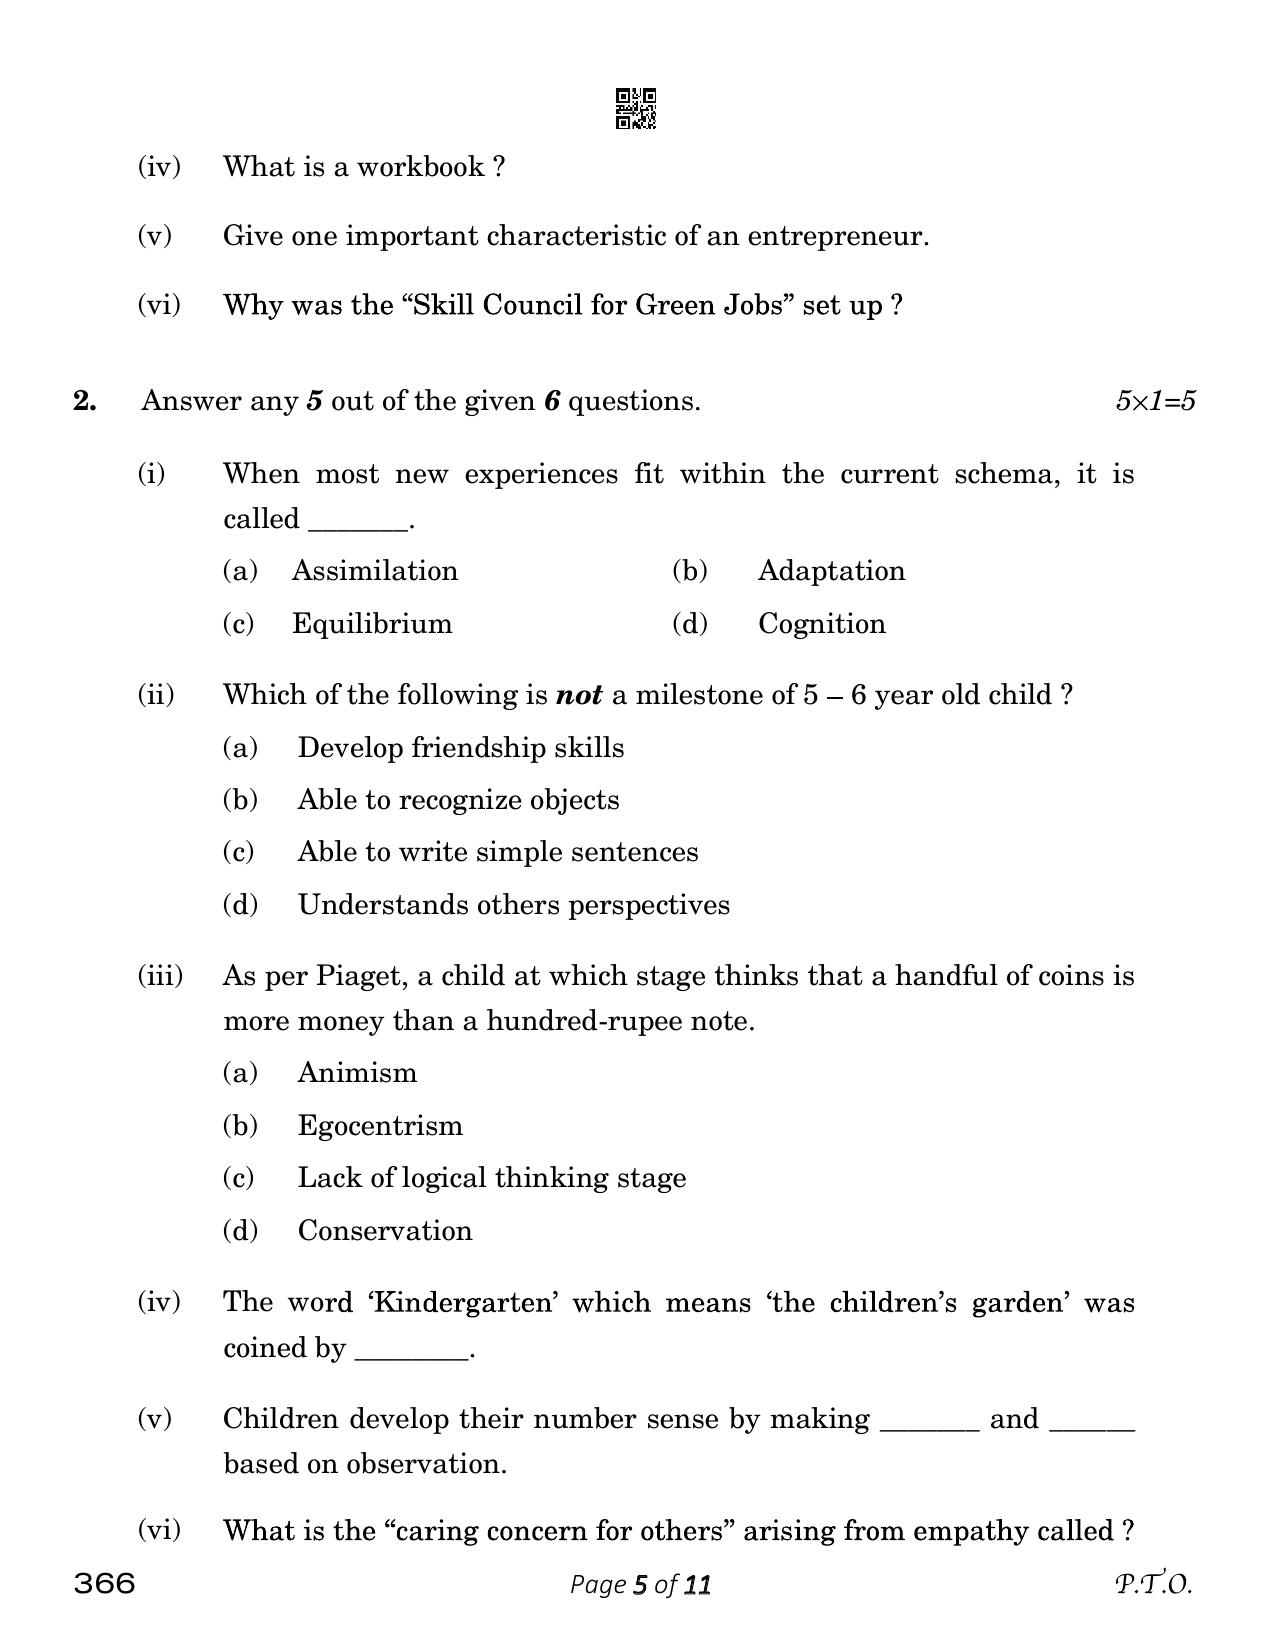 CBSE Class 12 Early Childhood Care & Education (Compartment) 2023 Question Paper - Page 5